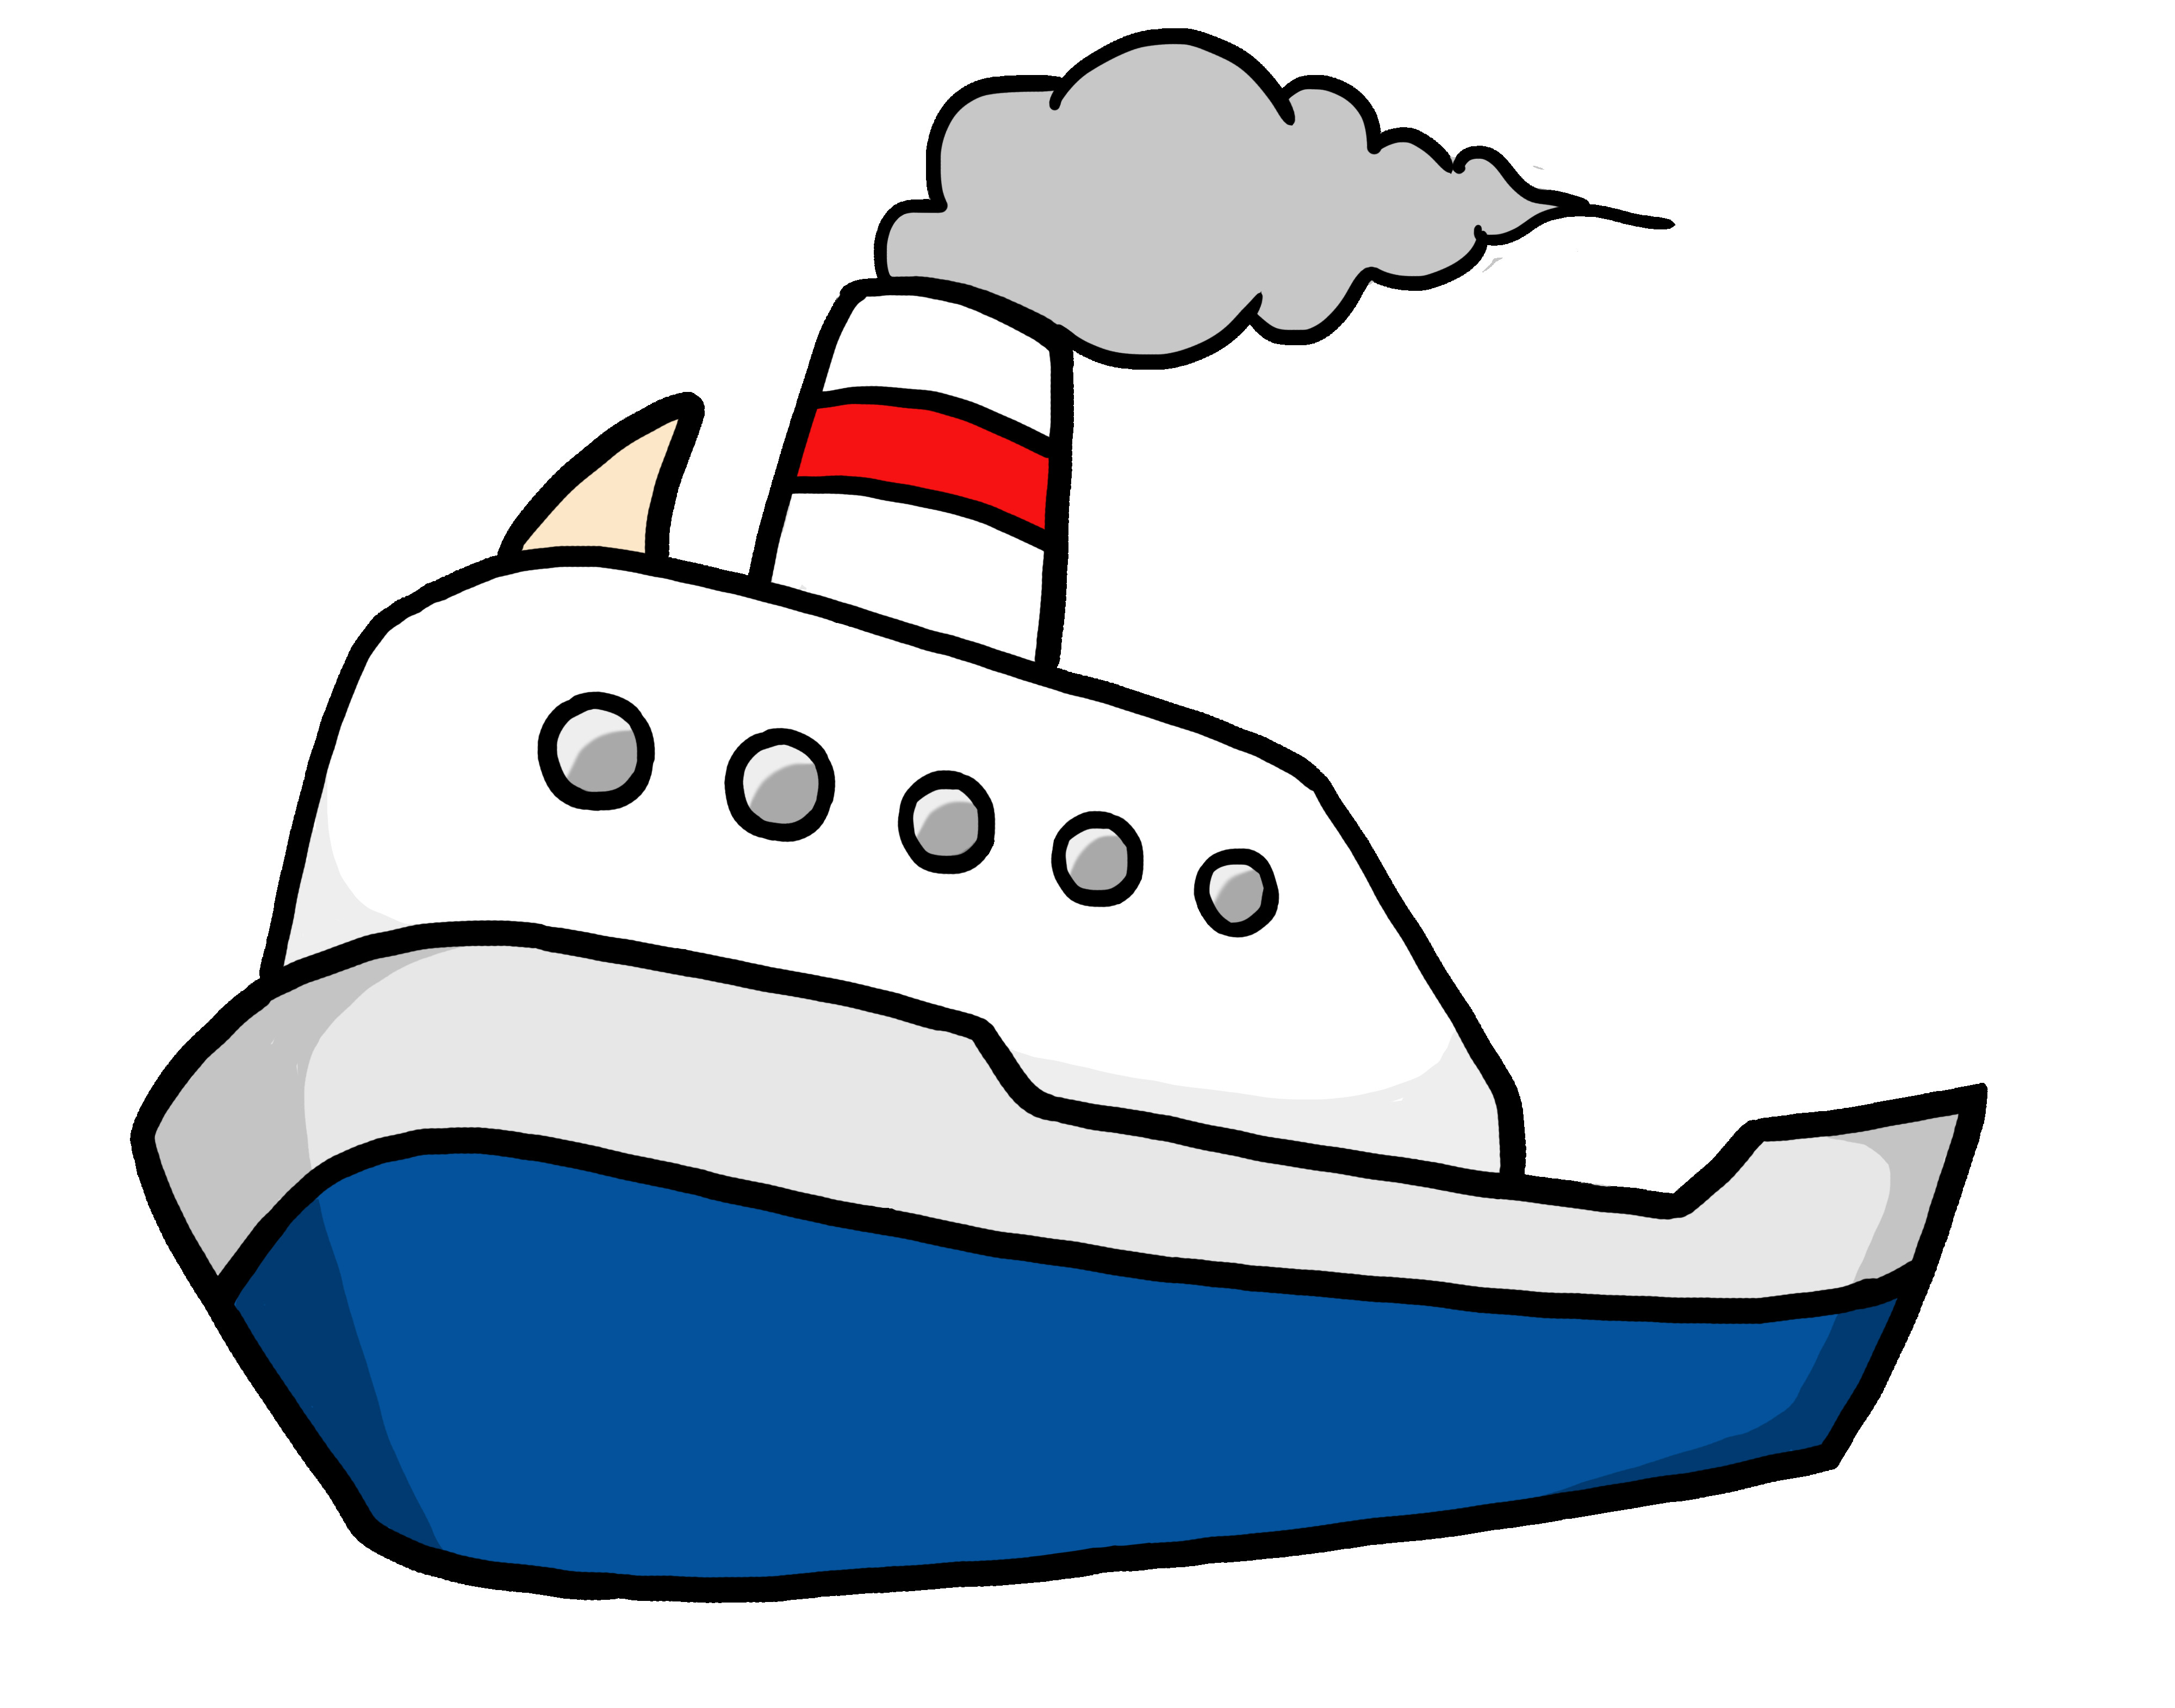 Boat clipart. Fishing rescuedesk me 